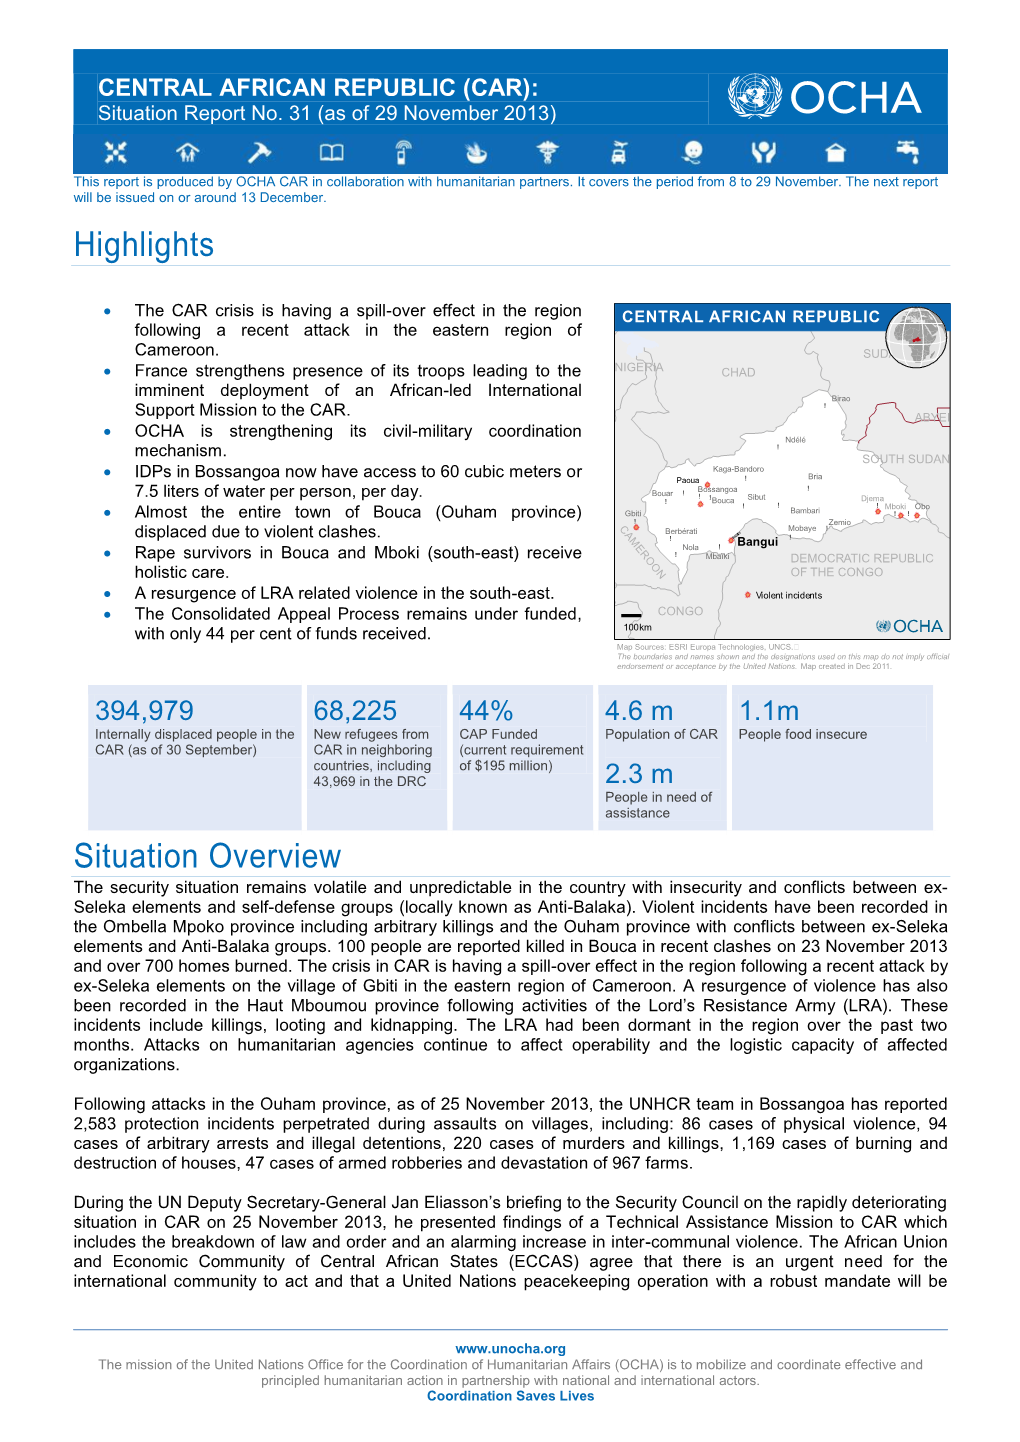 Central African Republic Situation Report No 31.Pdf